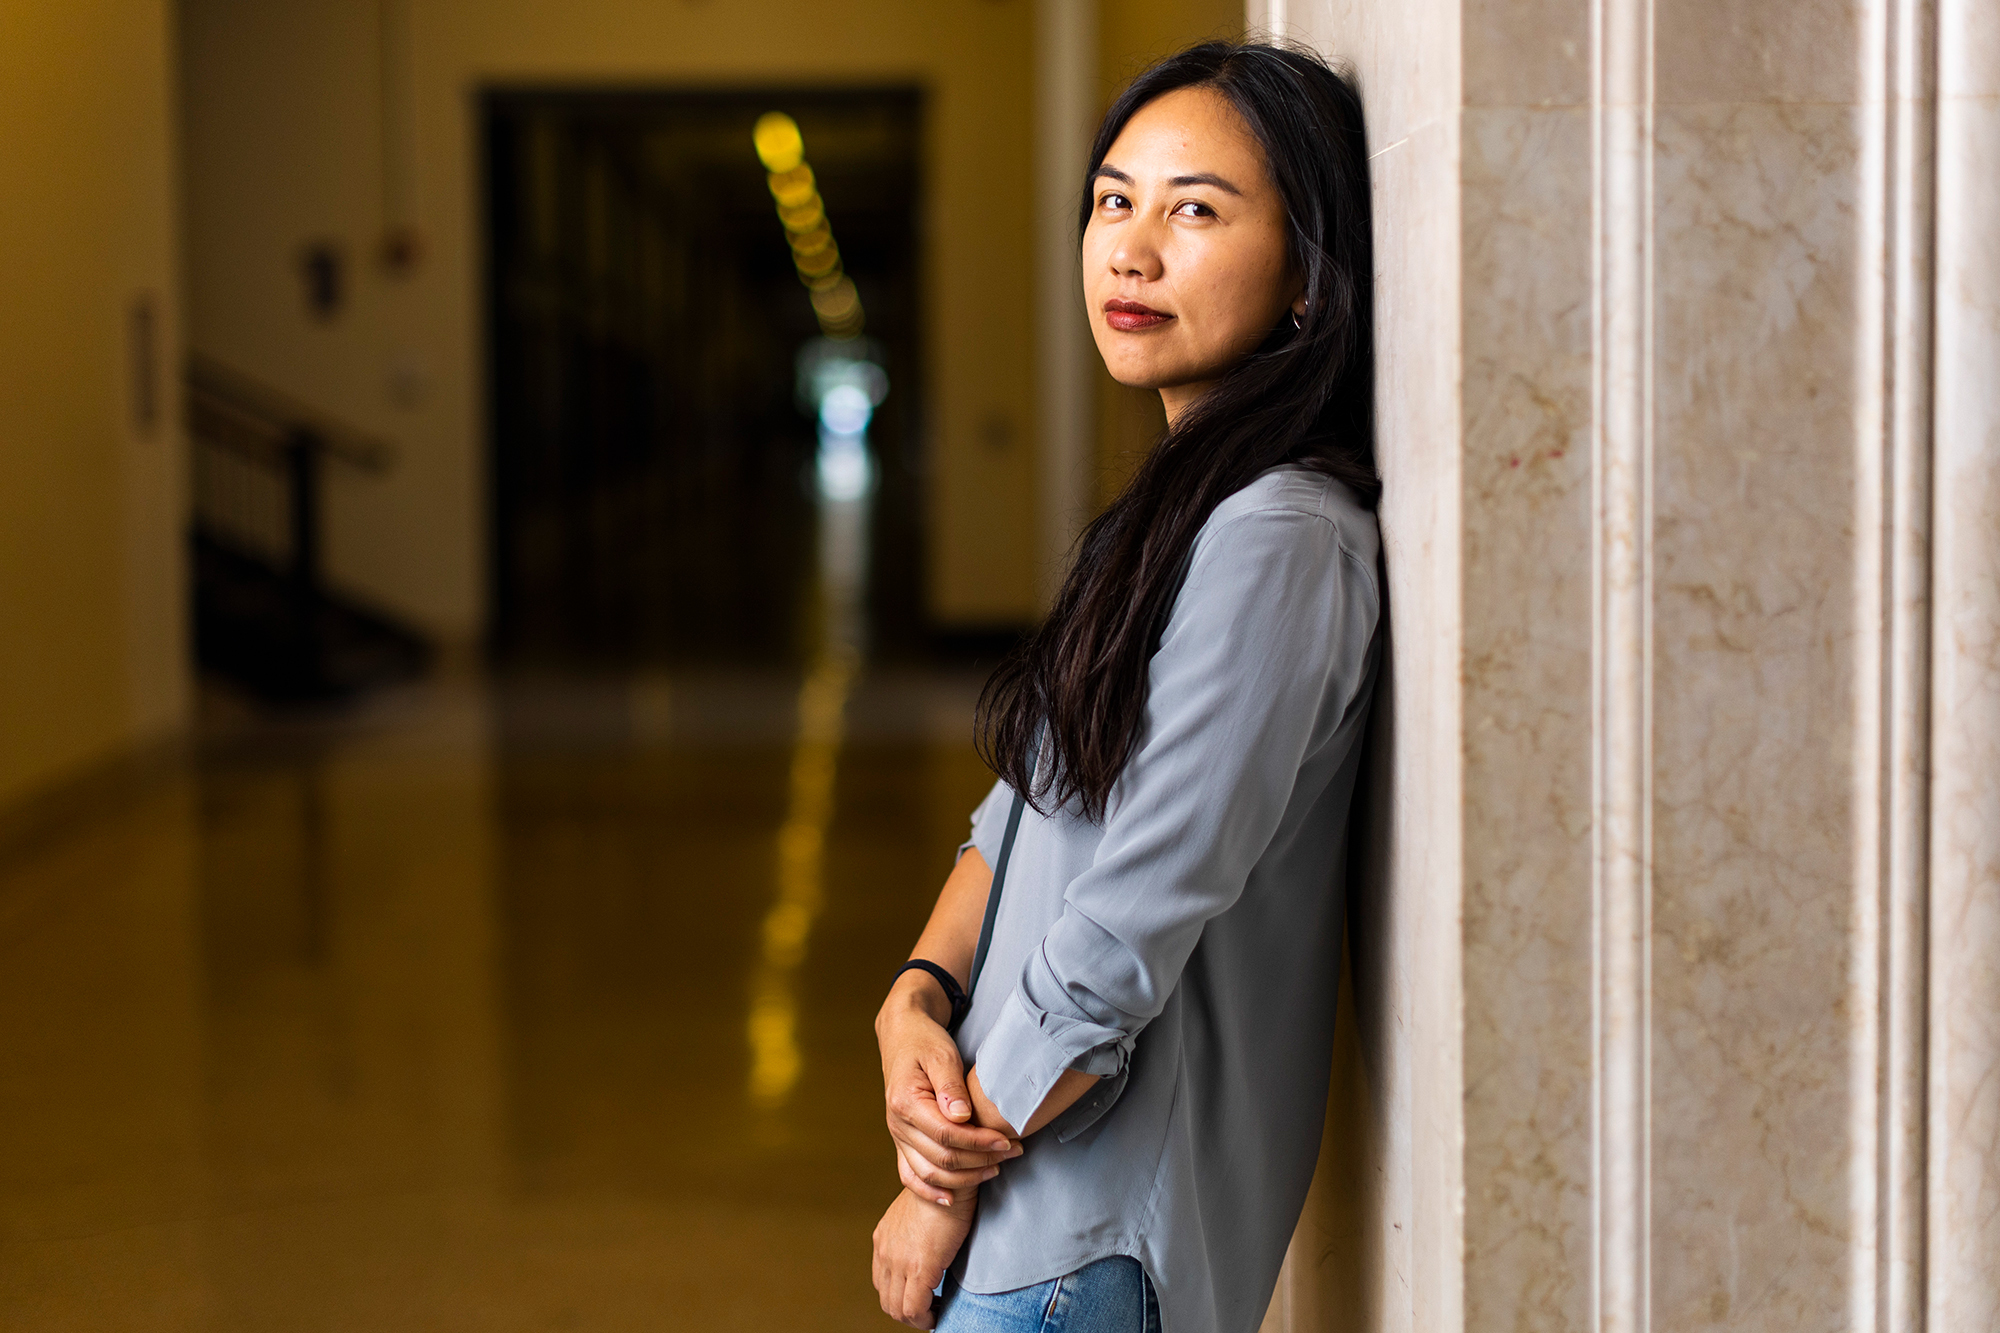 Danielle Li, an associate professor of economics at the MIT Sloan School of Management, studies scientific practices and organizational decisions — and provides data about improving them. 